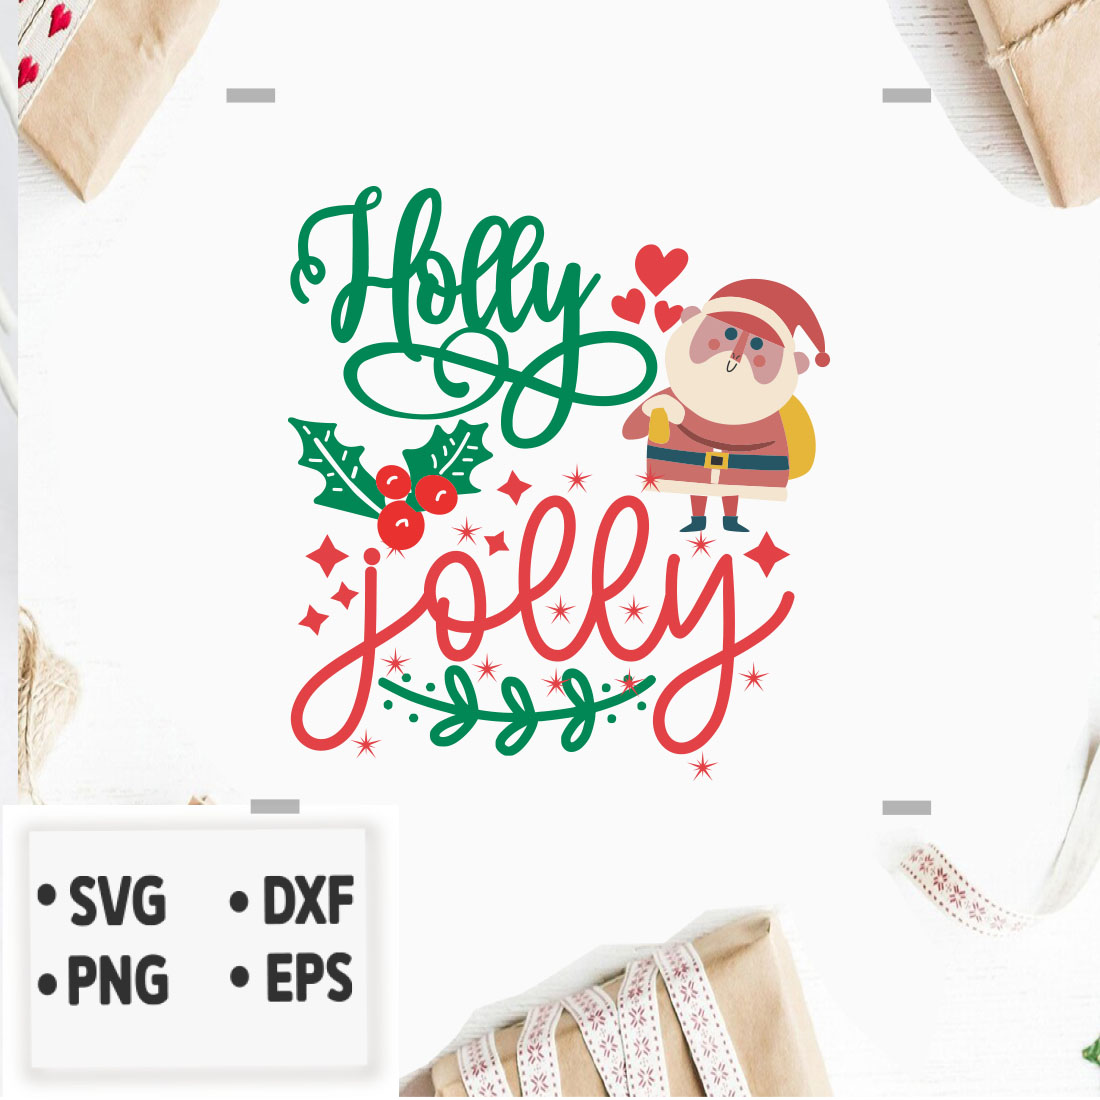 Image with enchanting inscription Holly jolly.